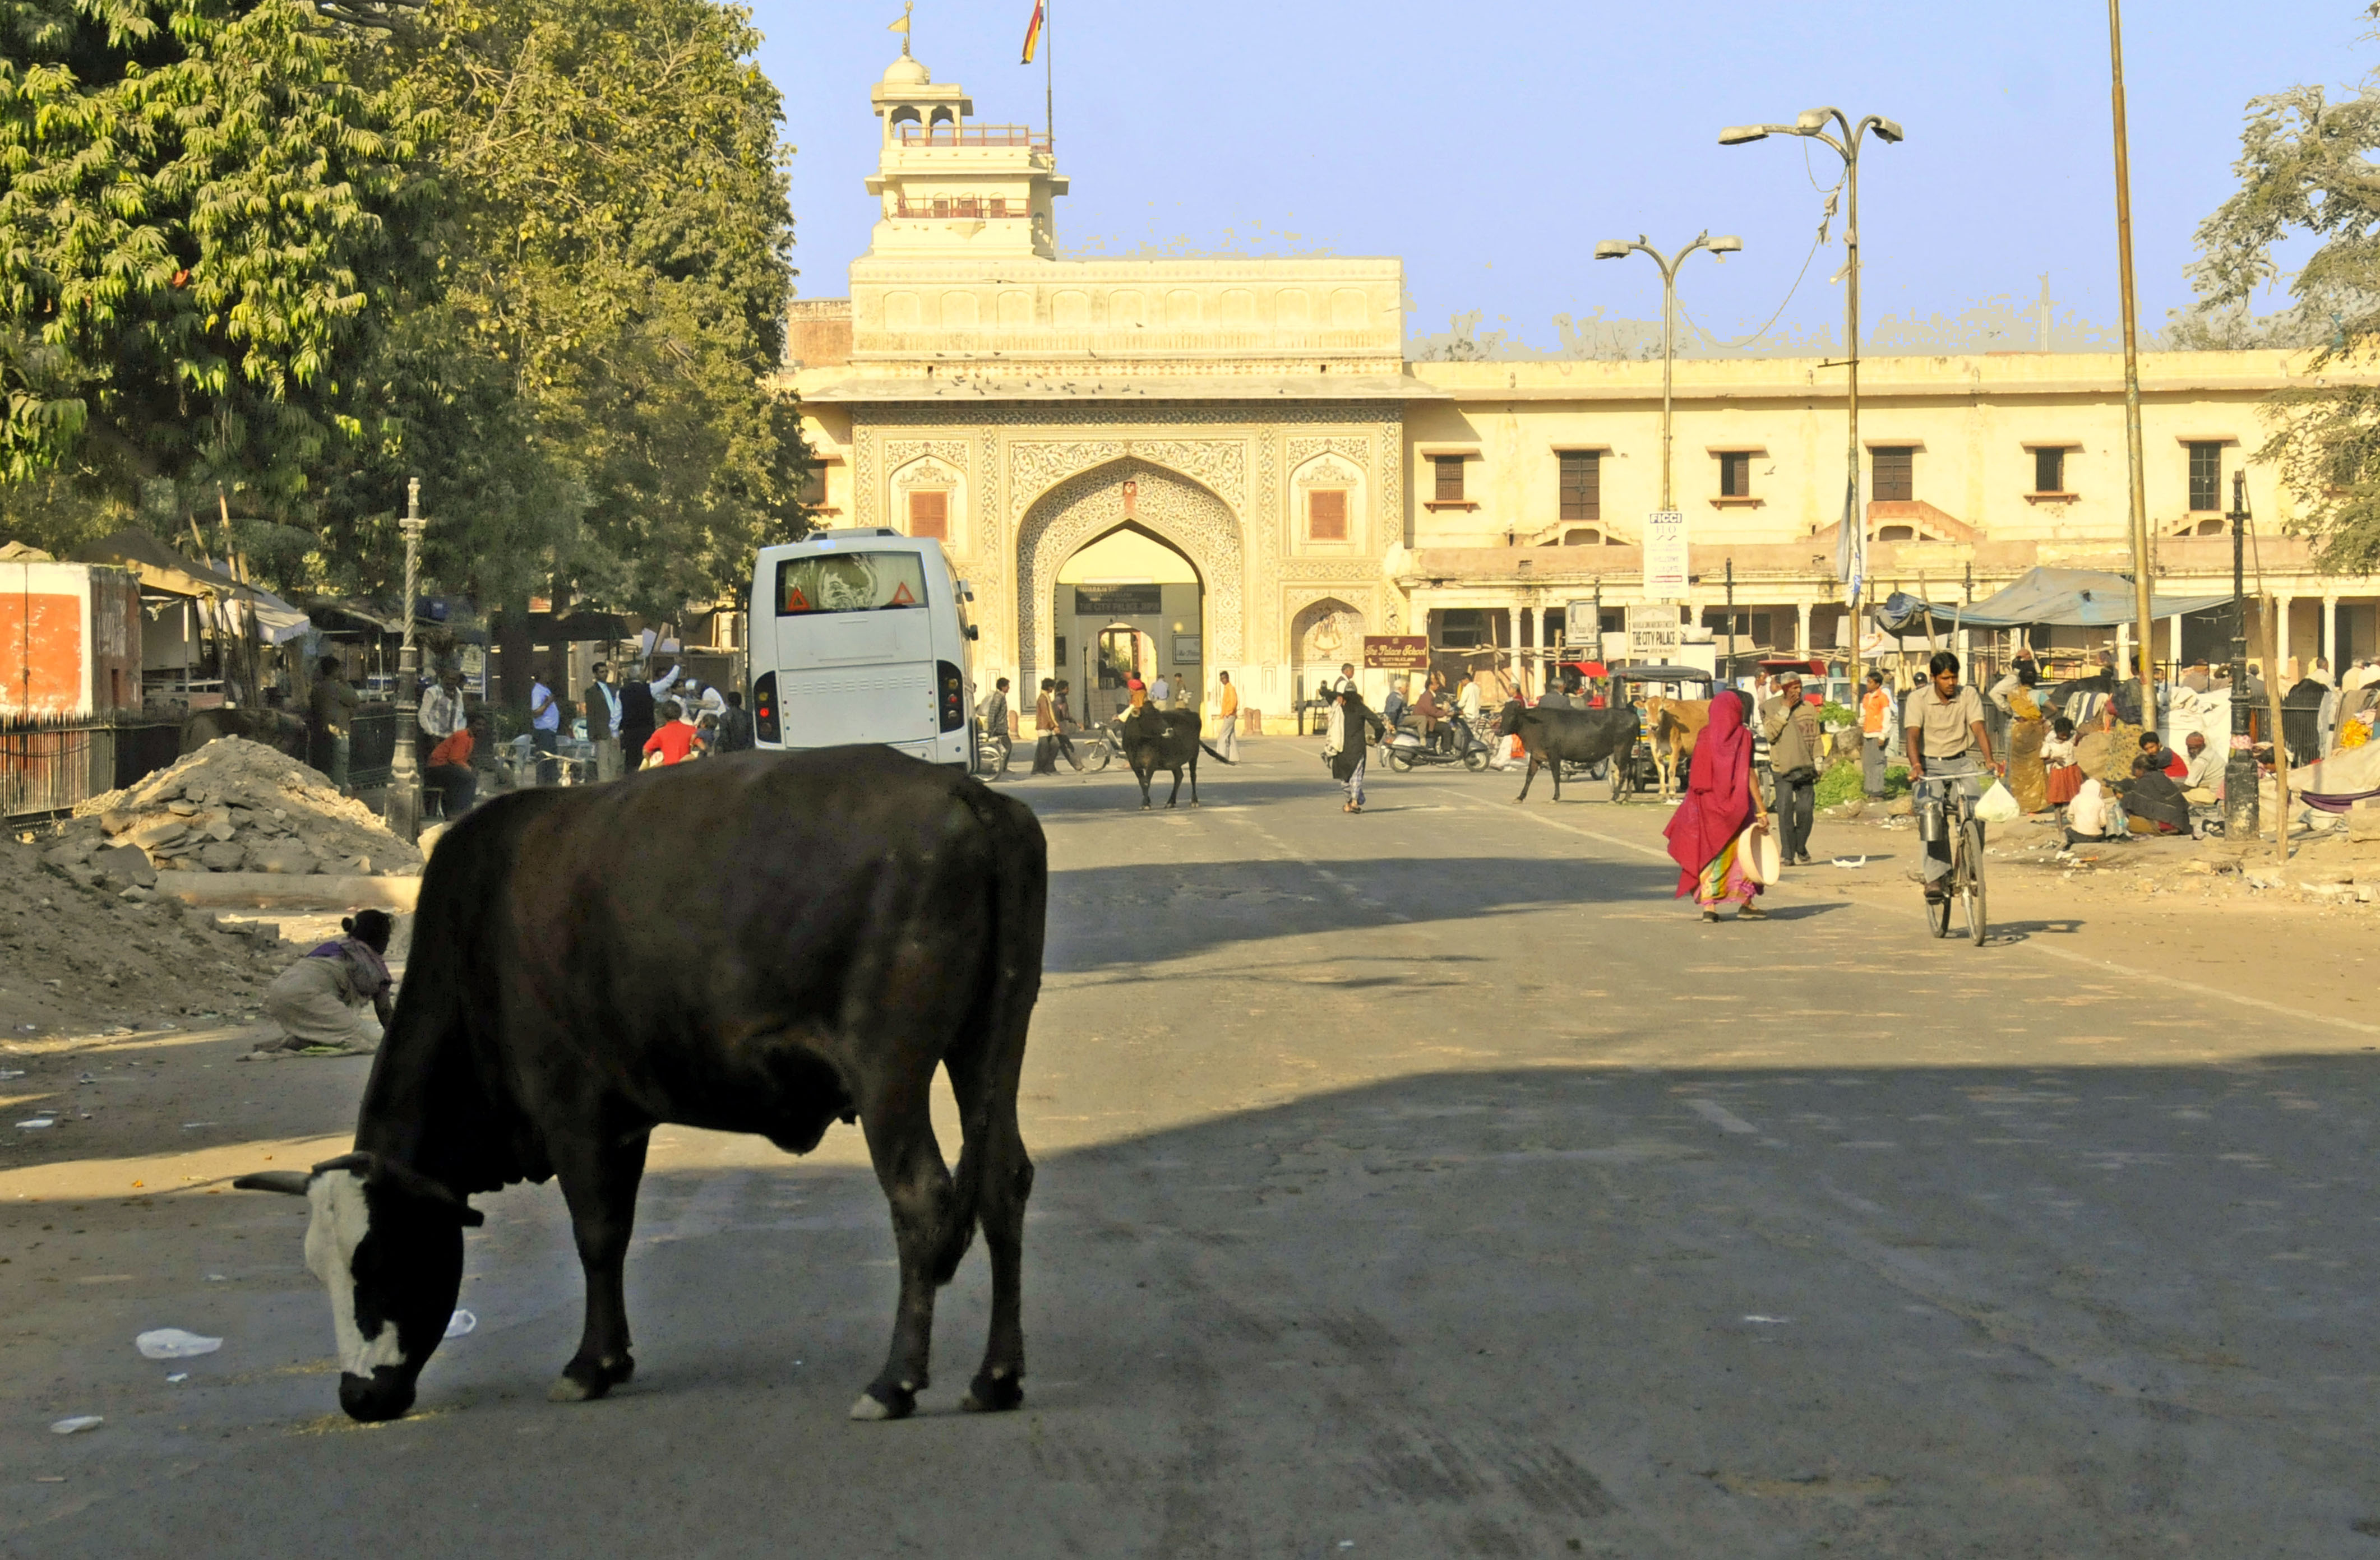 Udder madness in the streets of Jaipur